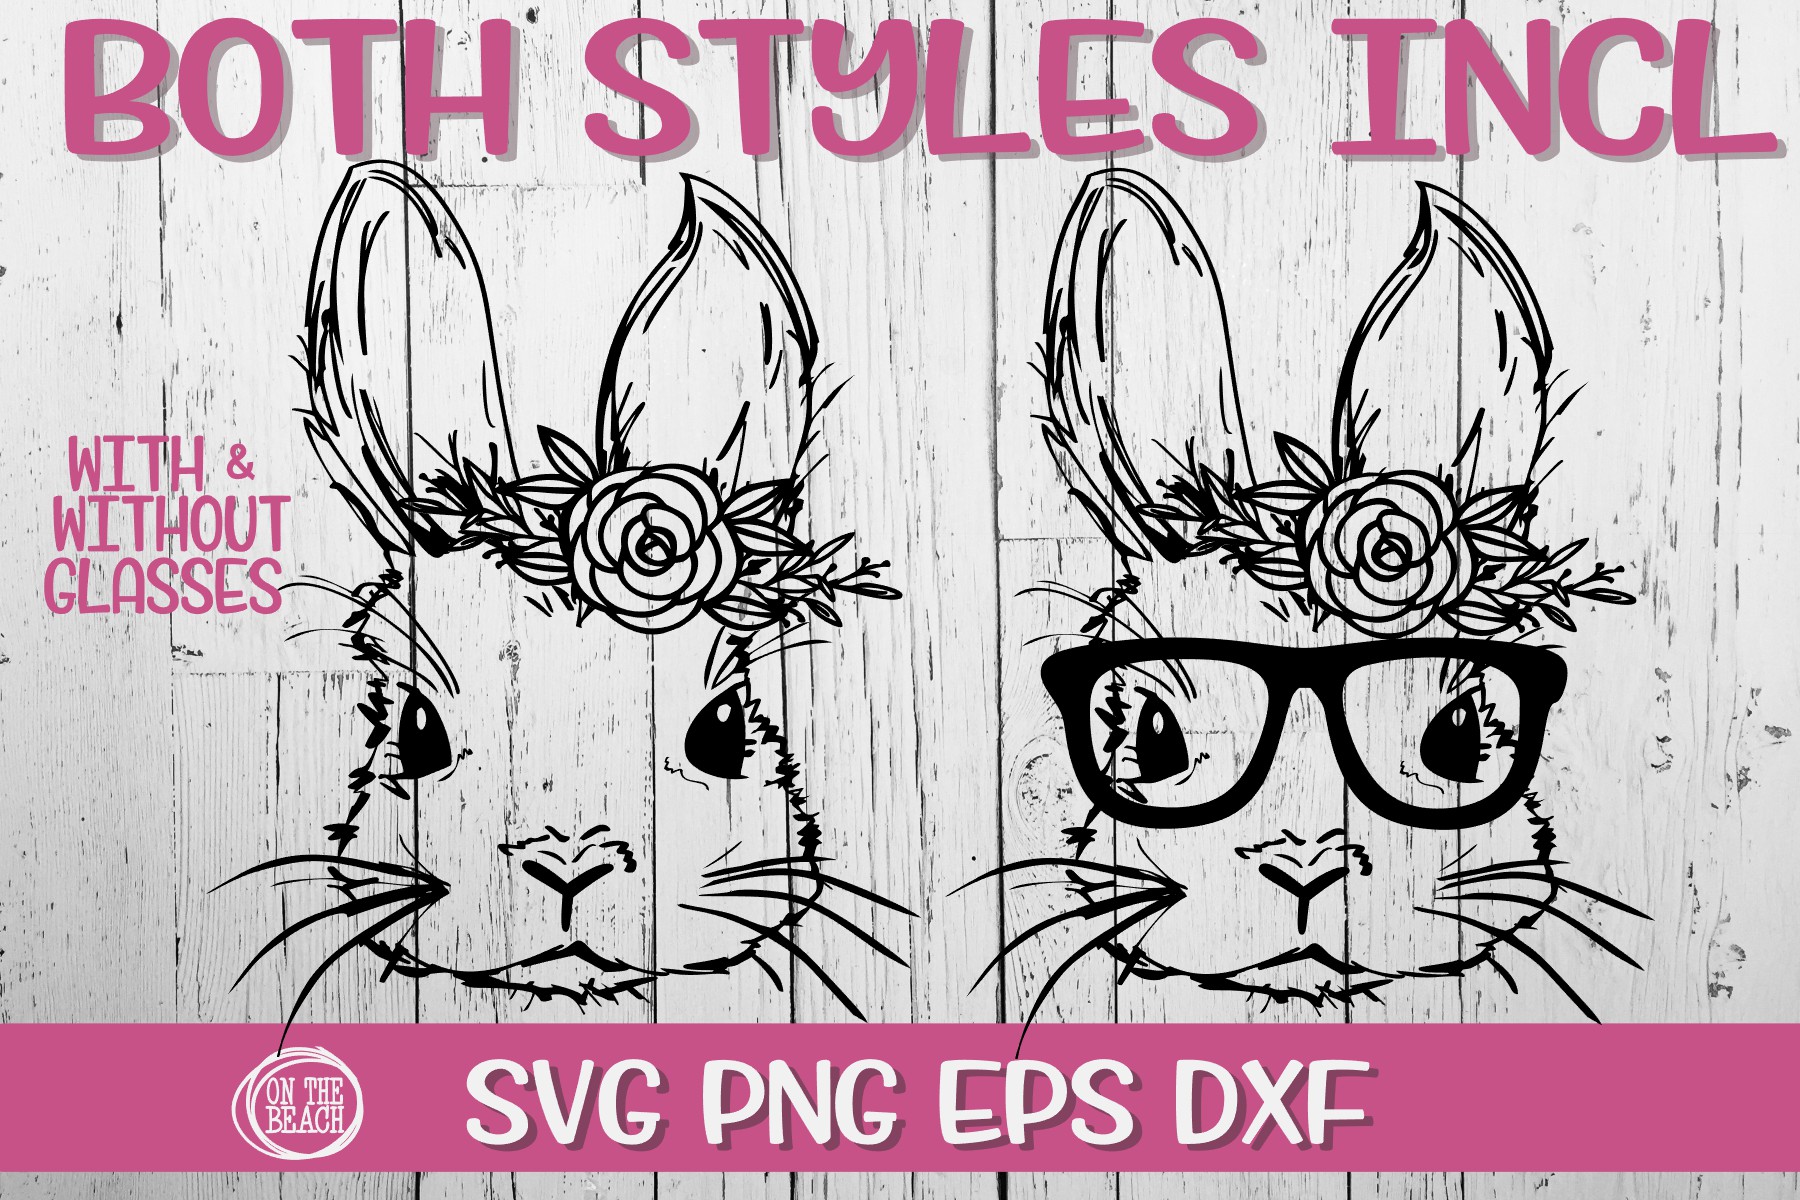 Download Bunny With Glasses - SVG PNG EPS DXF (499869) | SVGs ...